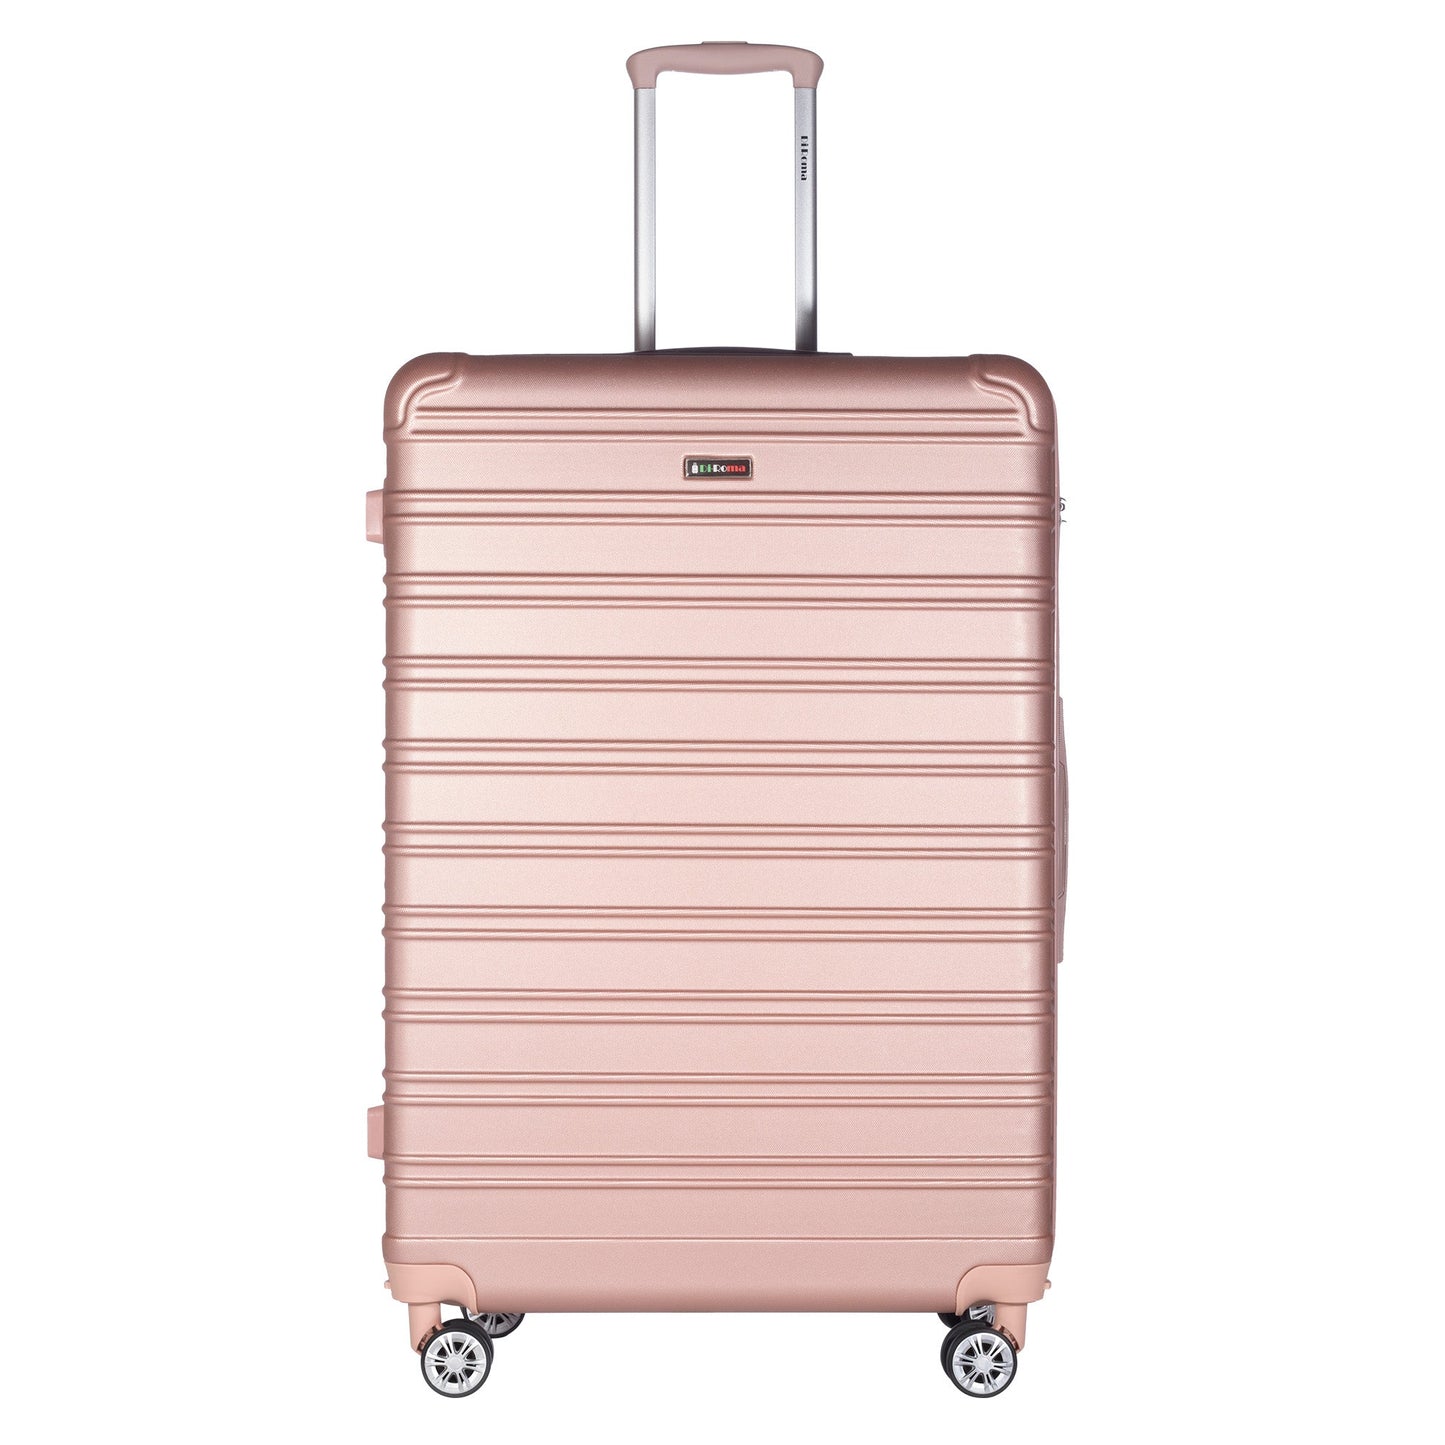 King Collection 4pc Rose Gold Luggage (20/26/28/30") Suitcase Lock Spinner Hard